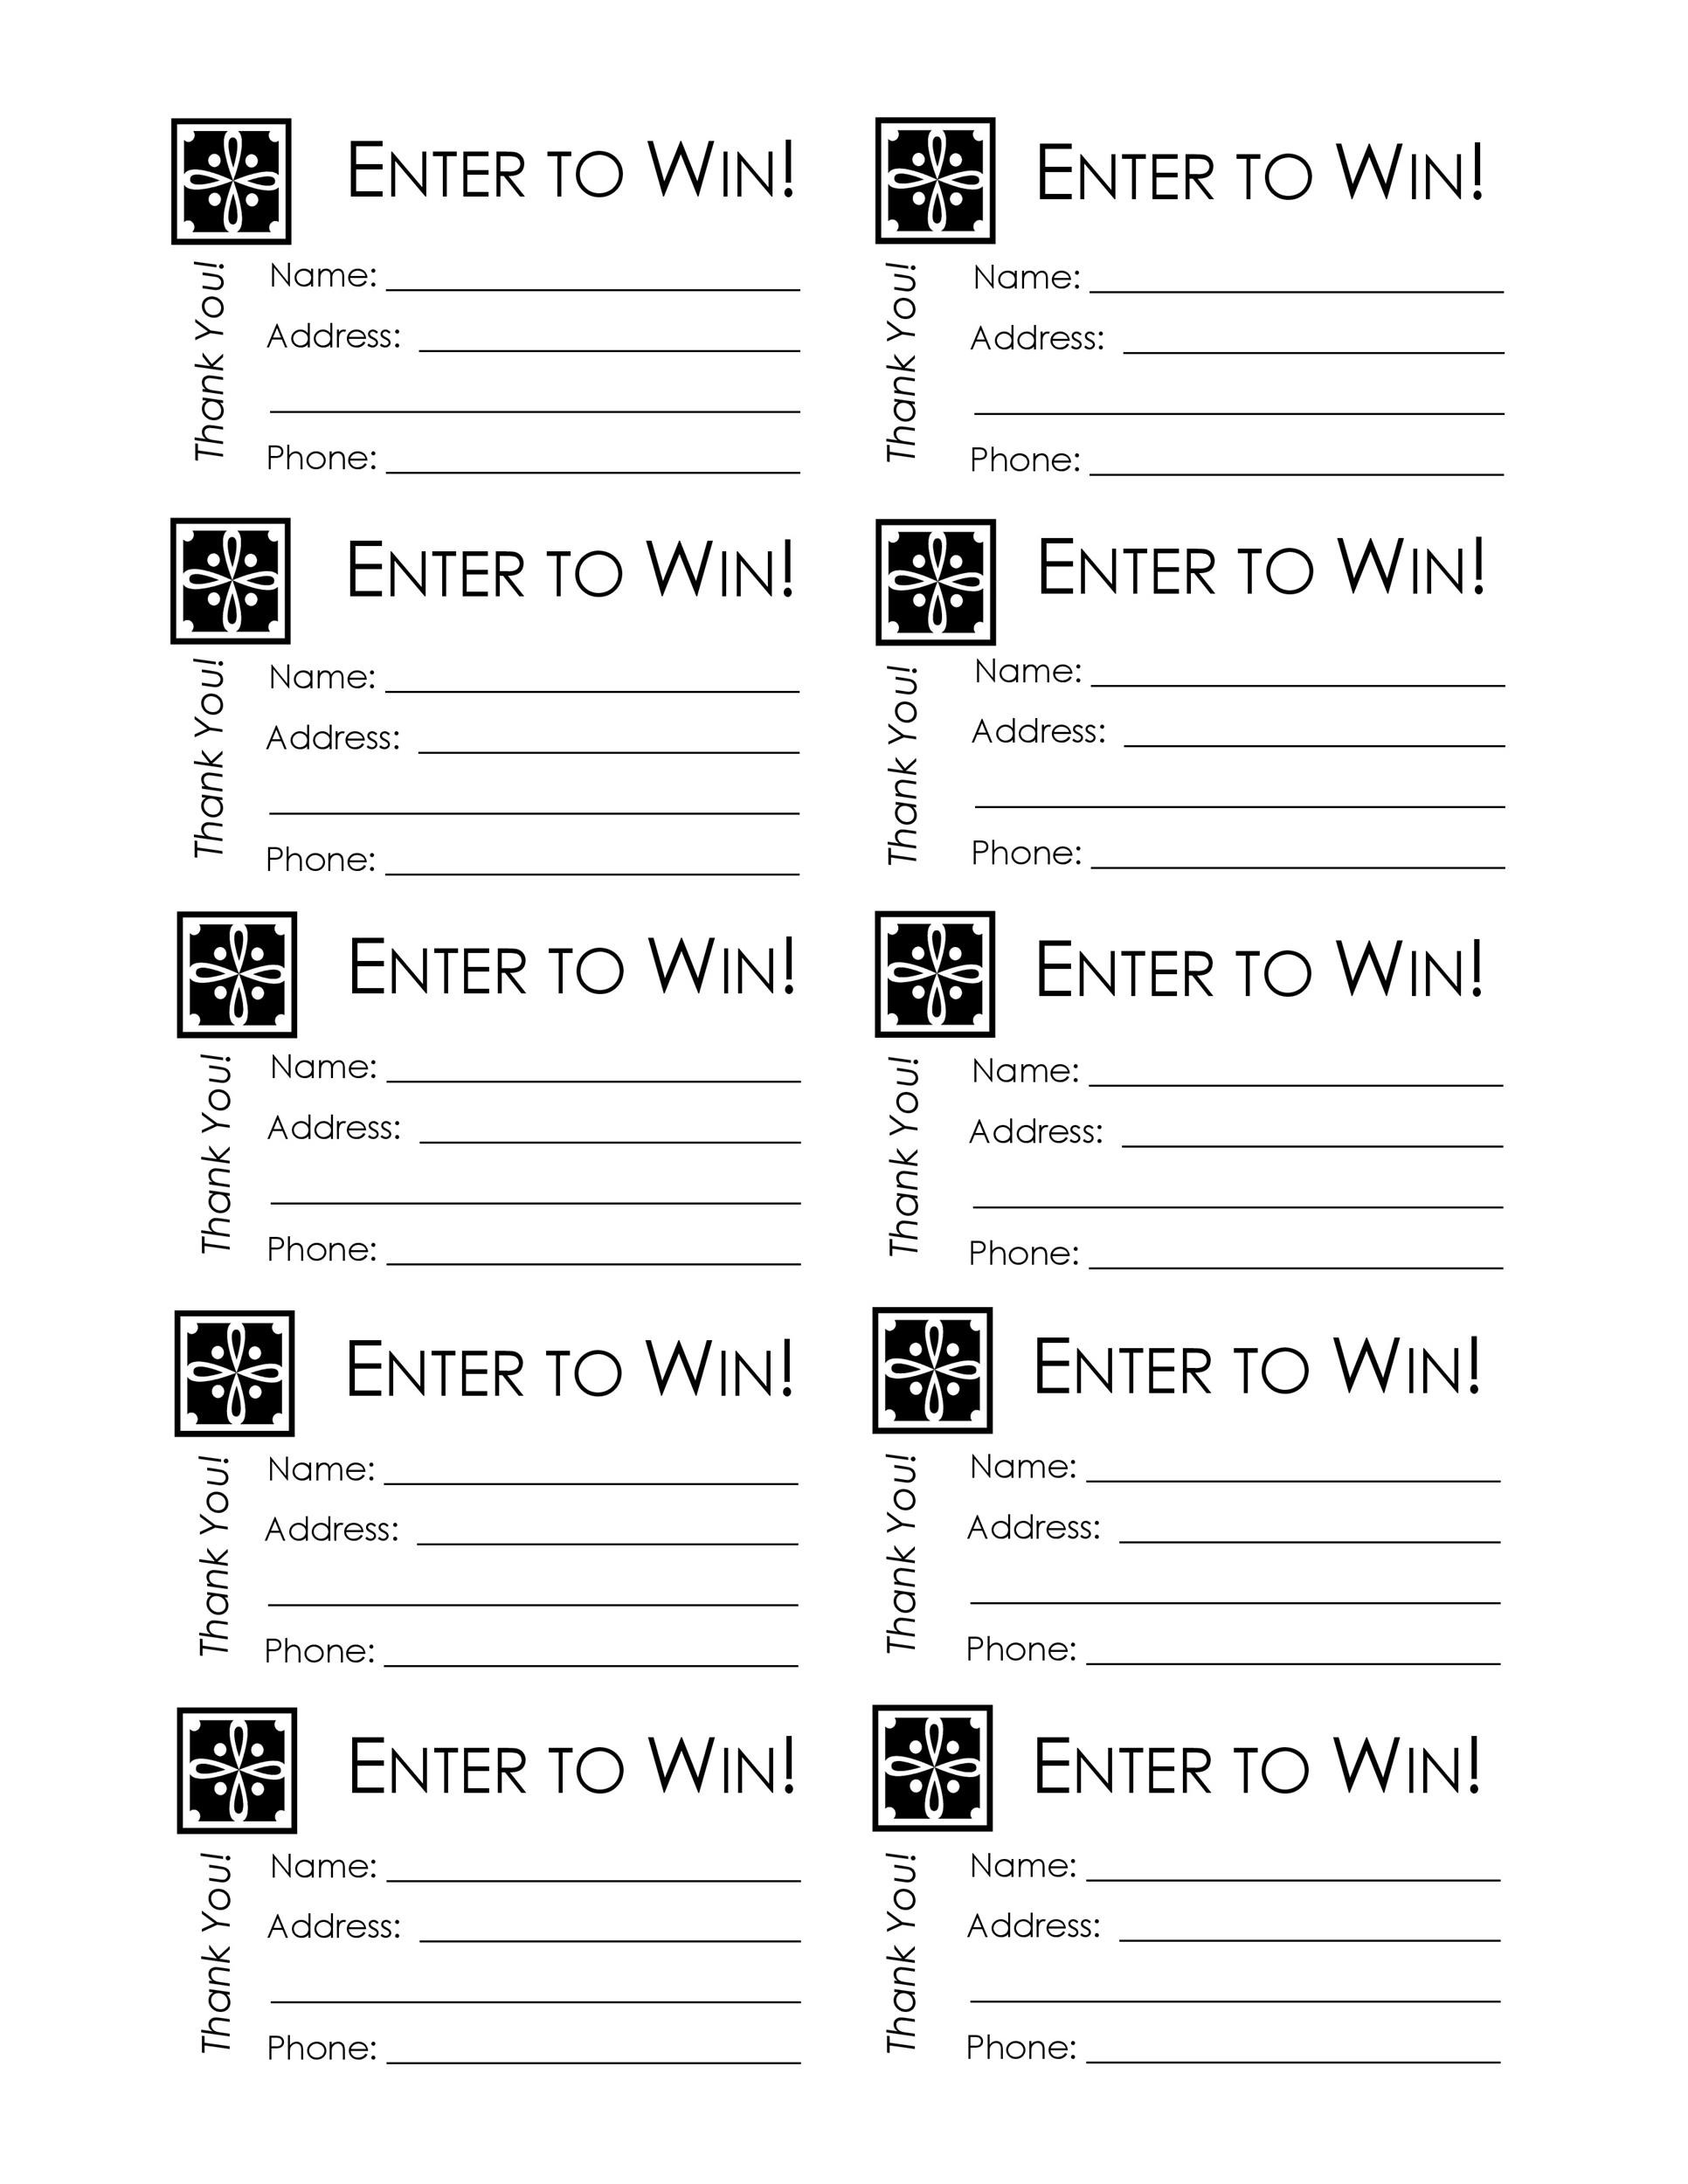 printable-raffle-ticket-template-customize-and-print